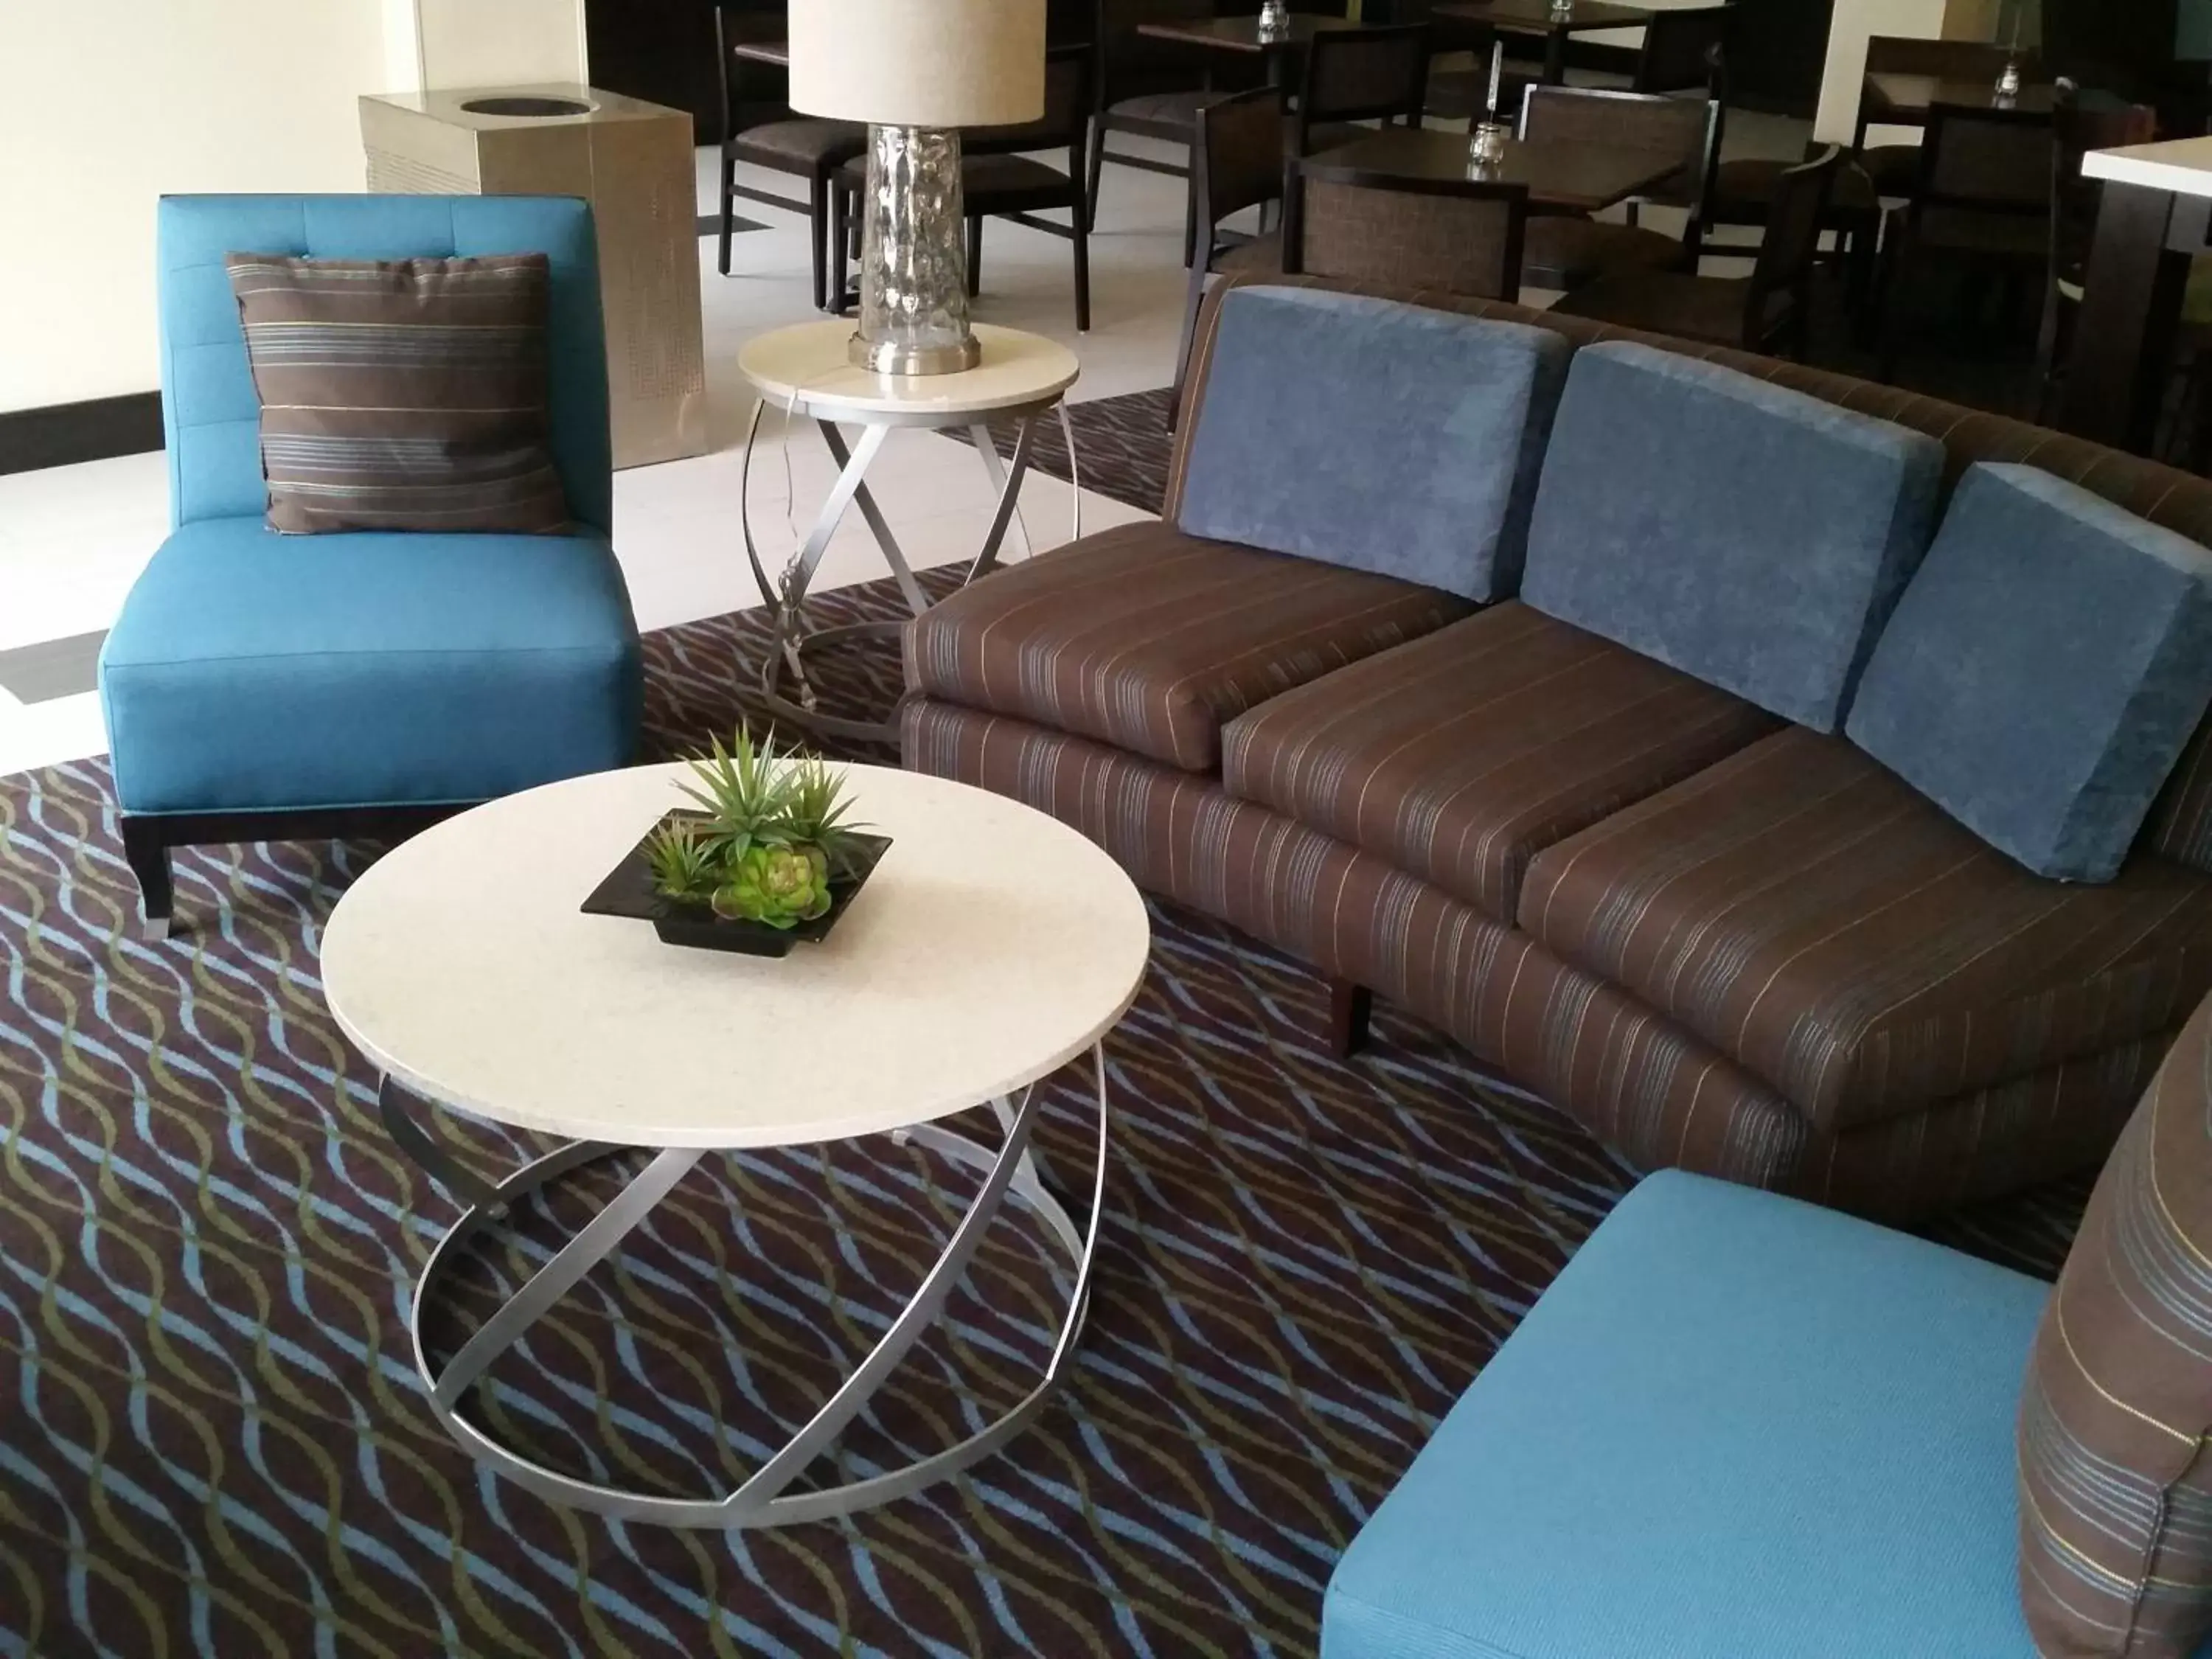 Property building, Seating Area in Holiday Inn Express and Suites Atascocita - Humble - Kingwood, an IHG Hotel